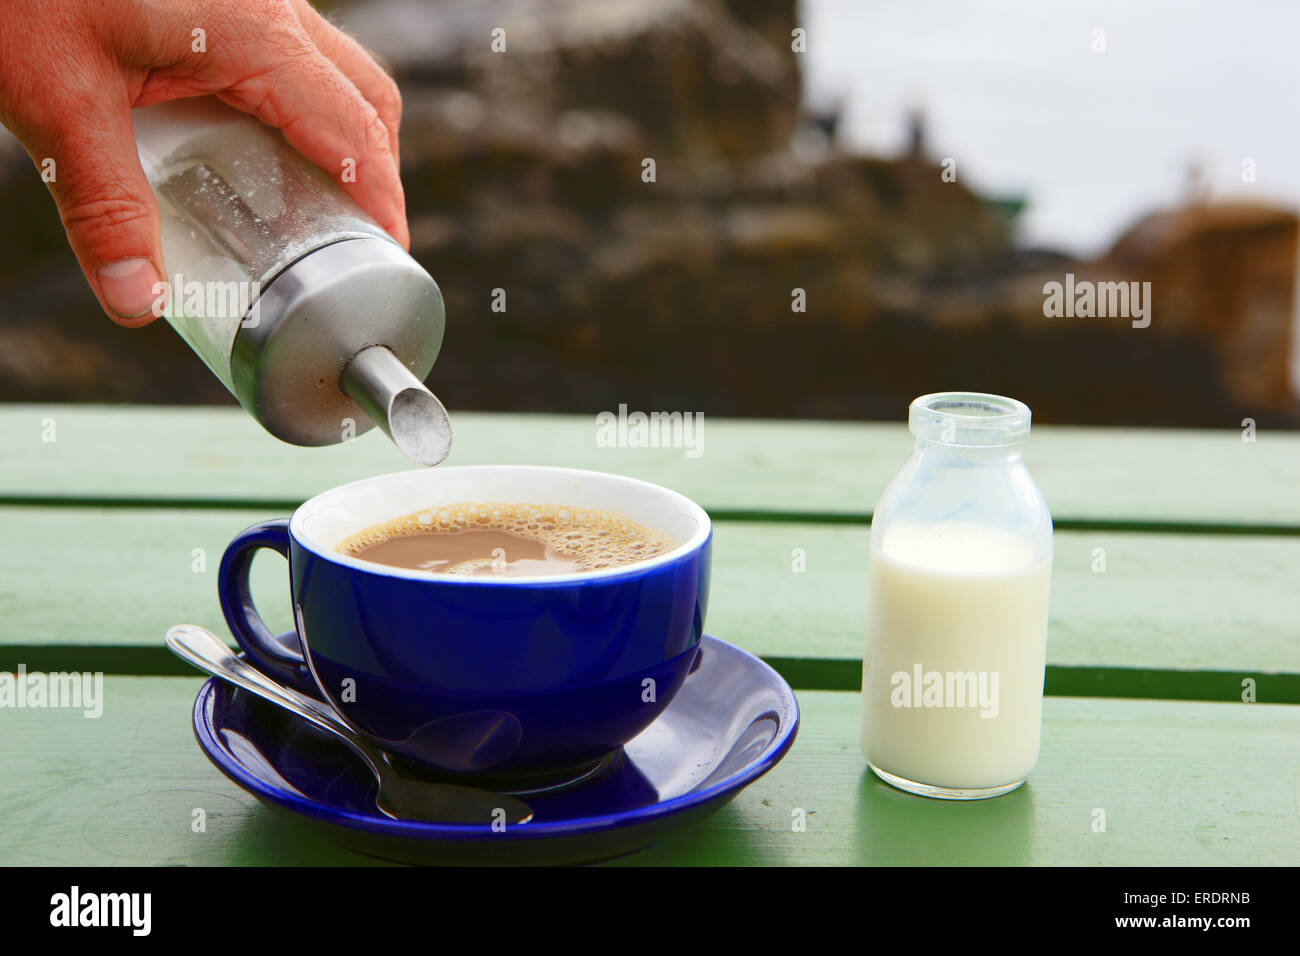 Cup of coffee on a wooden bench outside, having sugar poured into it and a small bottle of milk beside it Stock Photo